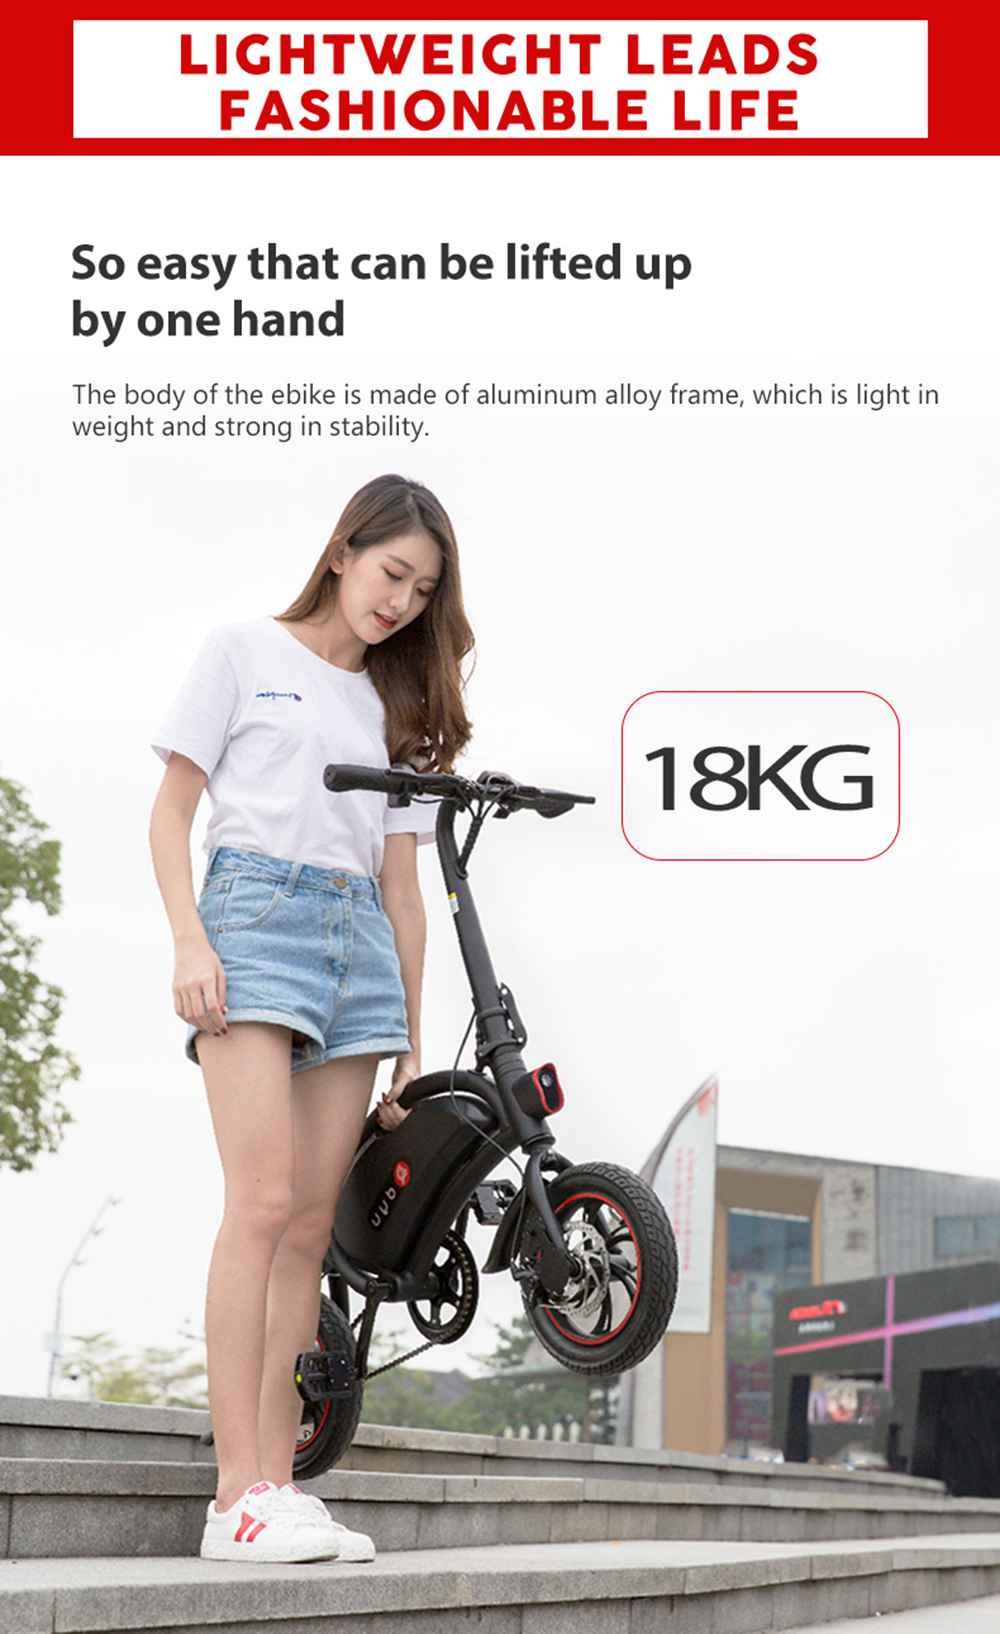 D3+ DYU Folding Moped Electric Bike 14 Inch Inflatable Rubber Tires 240W Motor Max Speed 25km/h Up To 45km Range Dual Disc Brakes Adjustable Height - Black